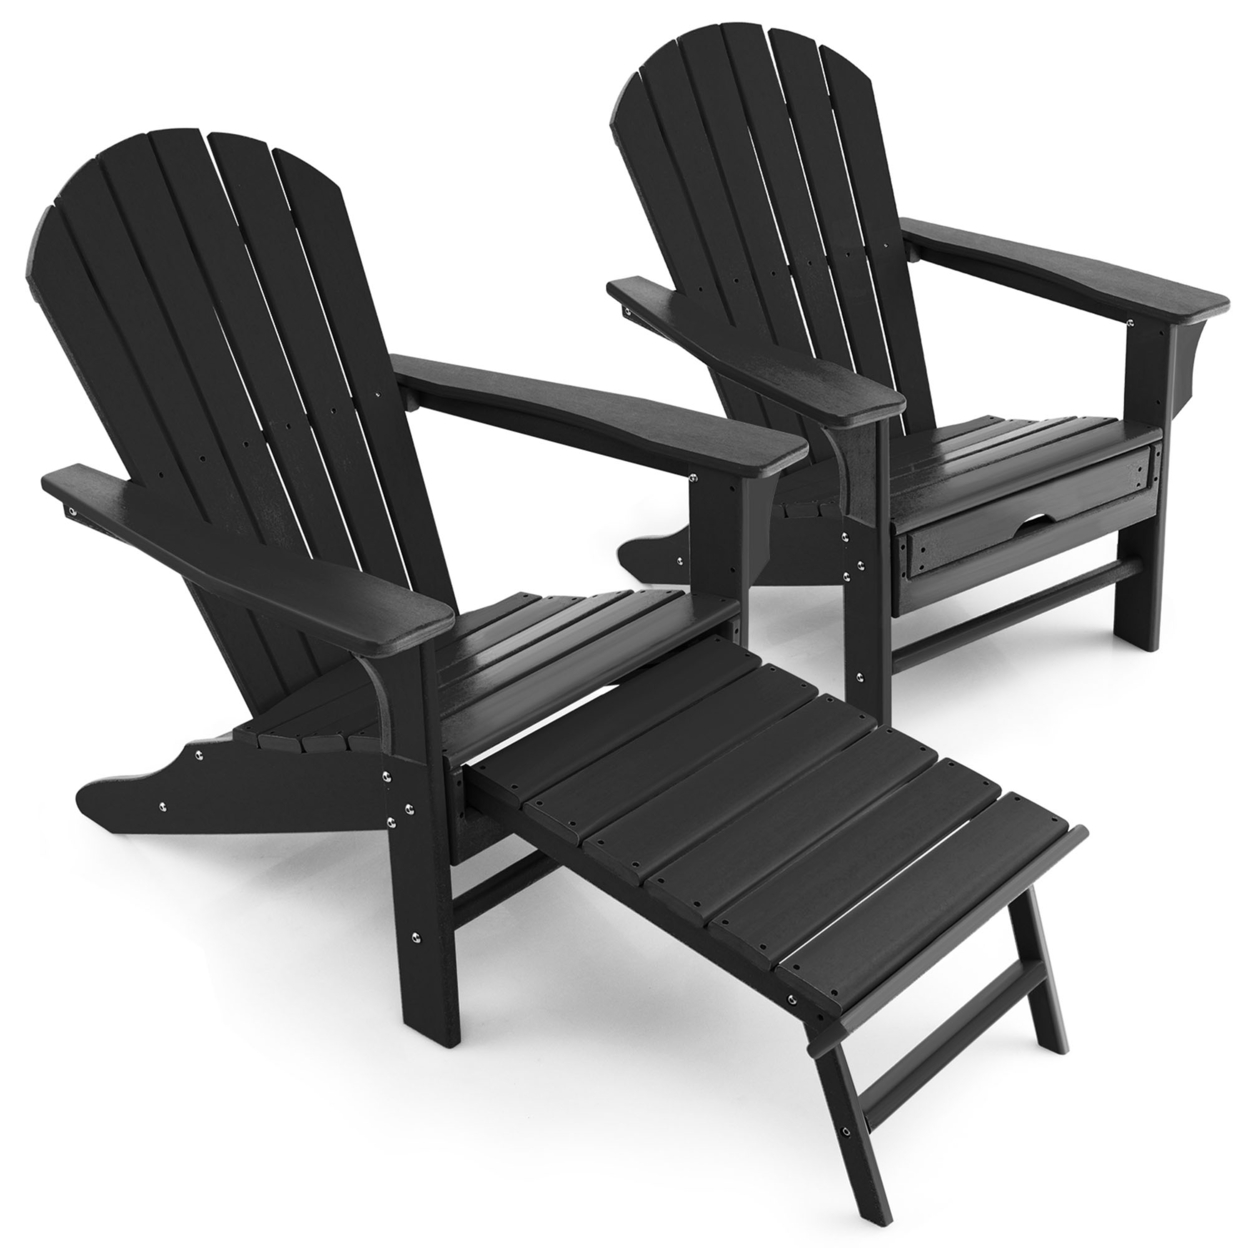 Set Of 2 Patio Adirondack Chair HDPE Outdoor Lounge Chair W/ Retractable Ottoman - Black